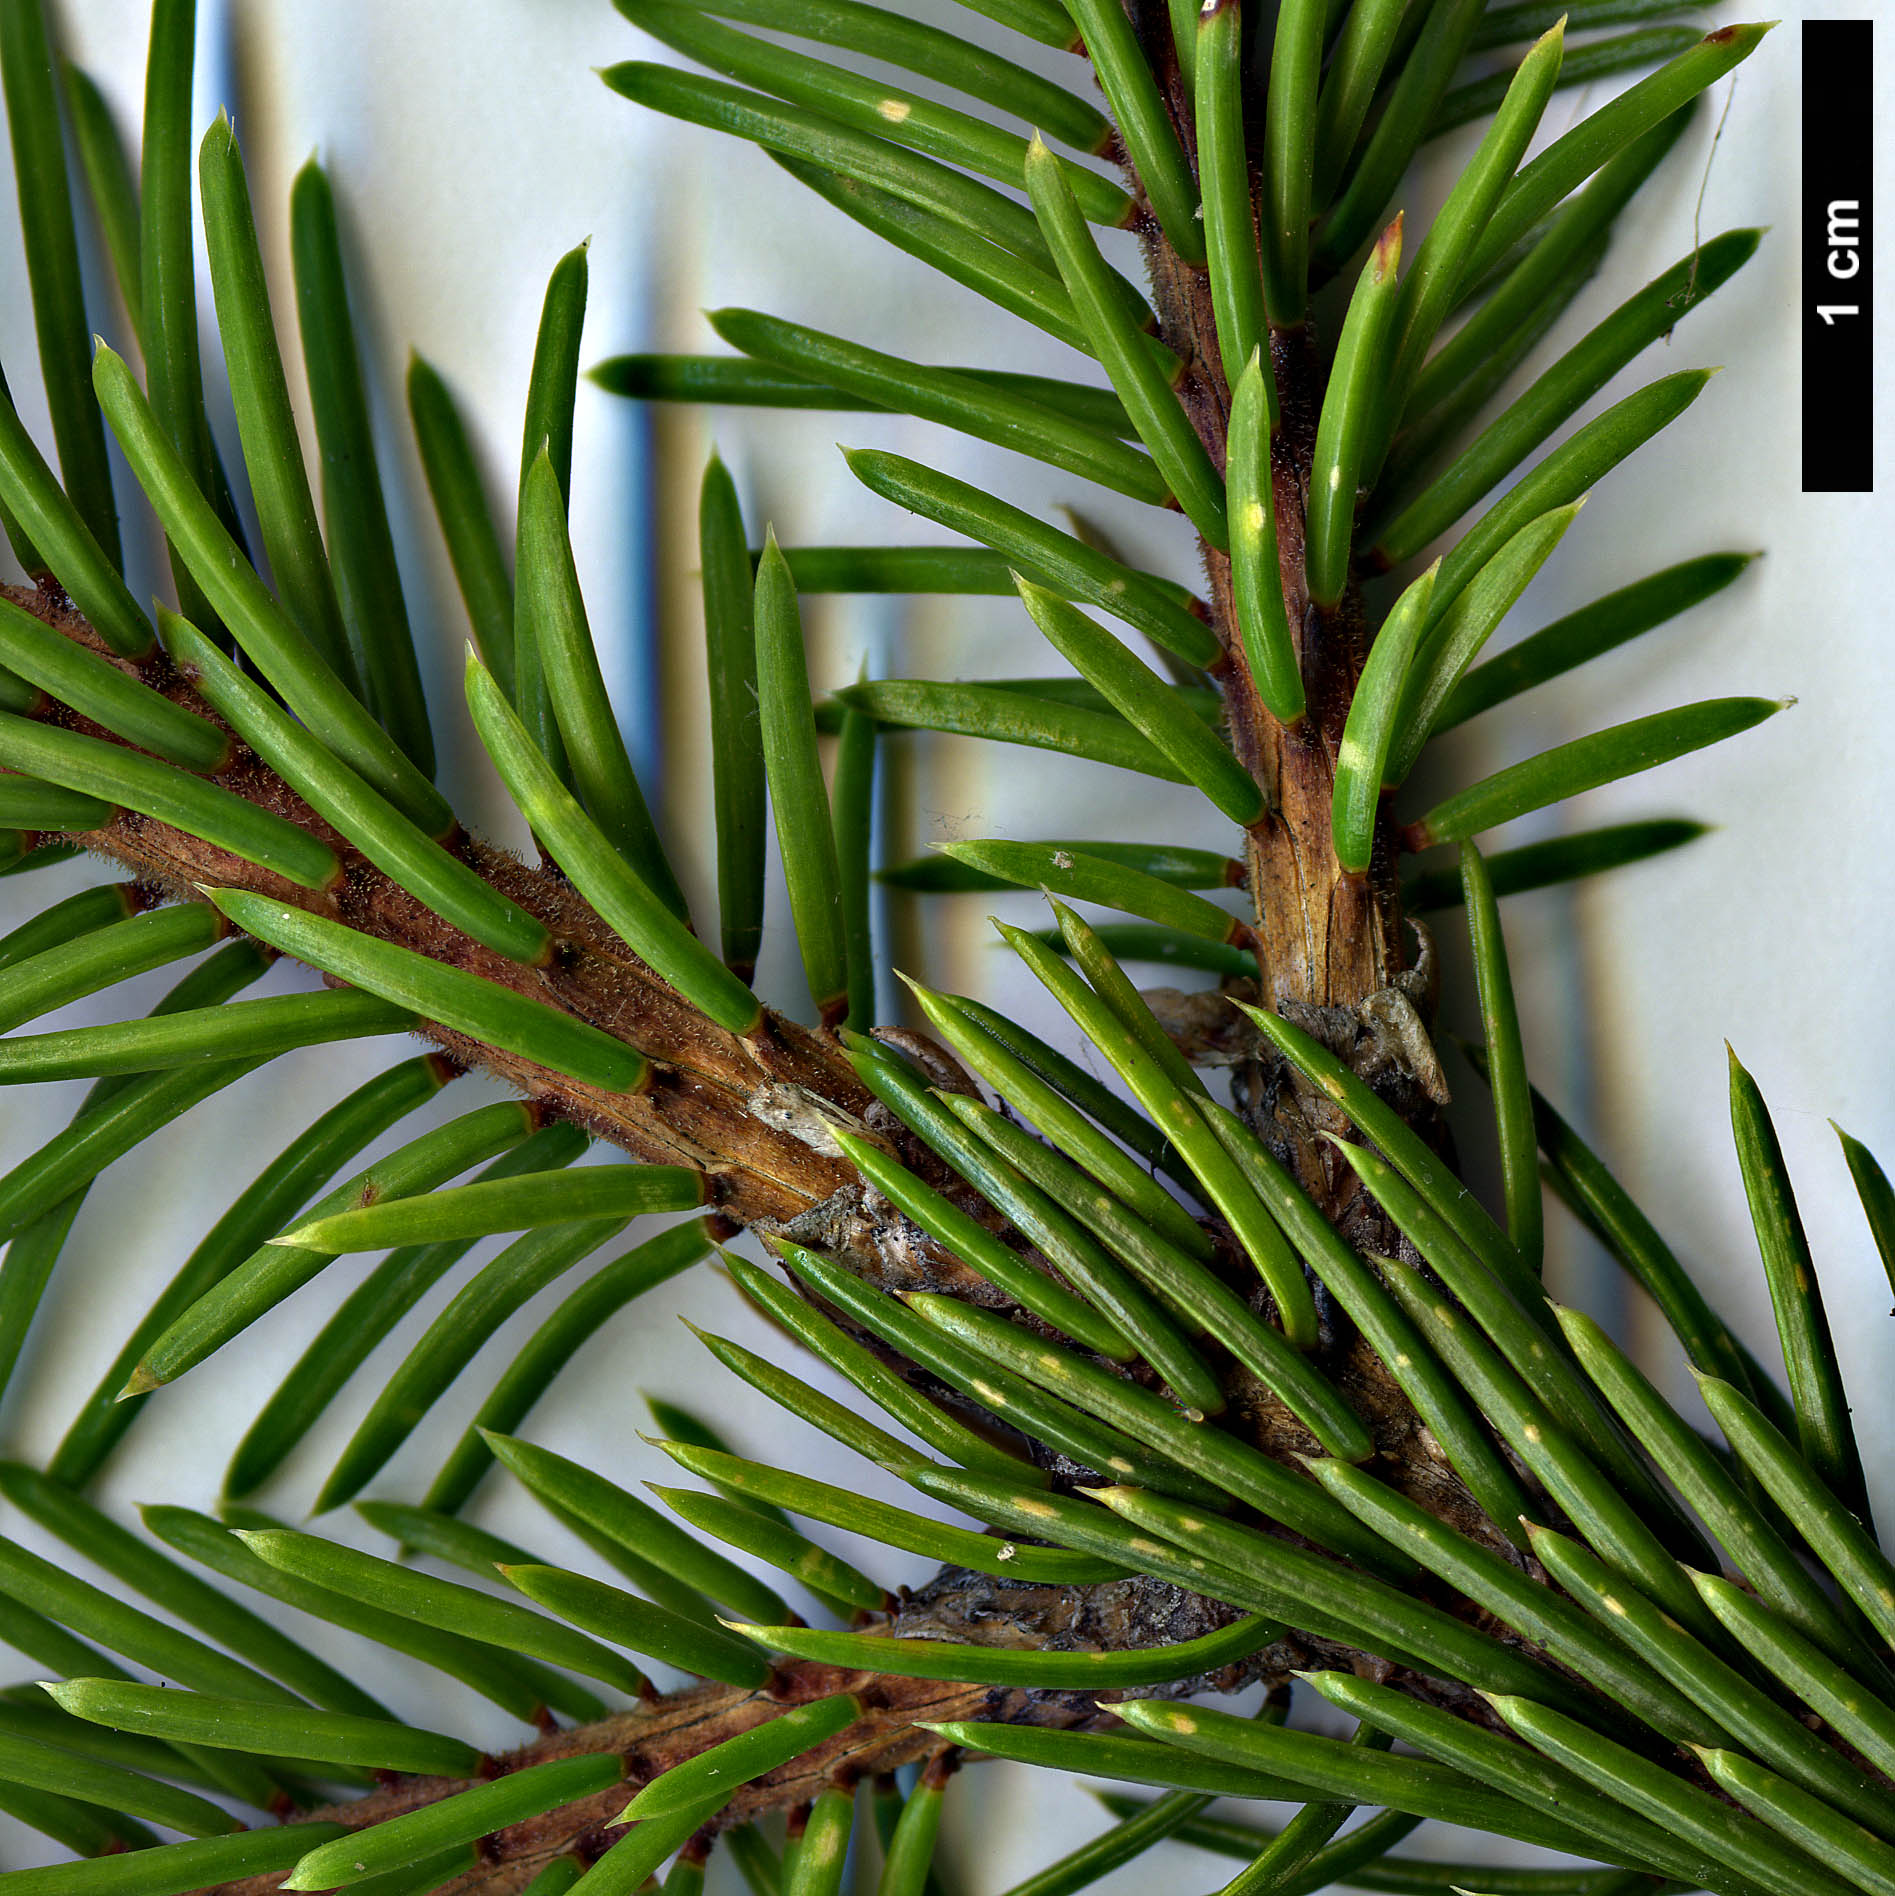 High resolution image: Family: Pinaceae - Genus: Picea - Taxon: linzhiensis